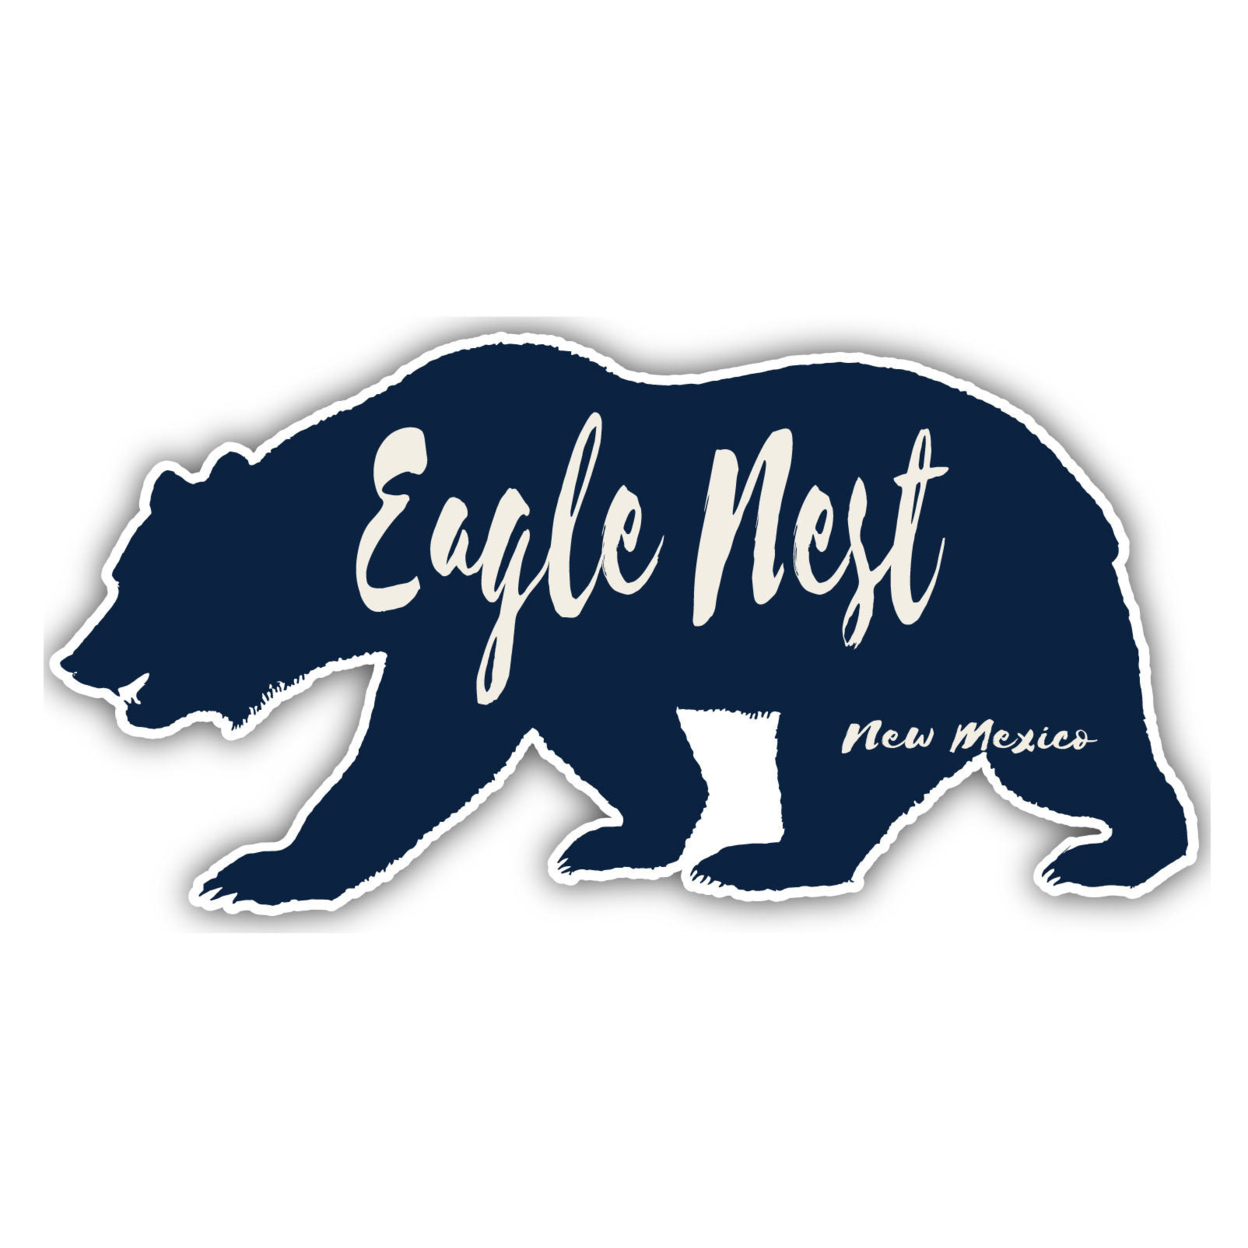 Eagle Nest New Mexico Souvenir Decorative Stickers (Choose Theme And Size) - 4-Pack, 12-Inch, Bear